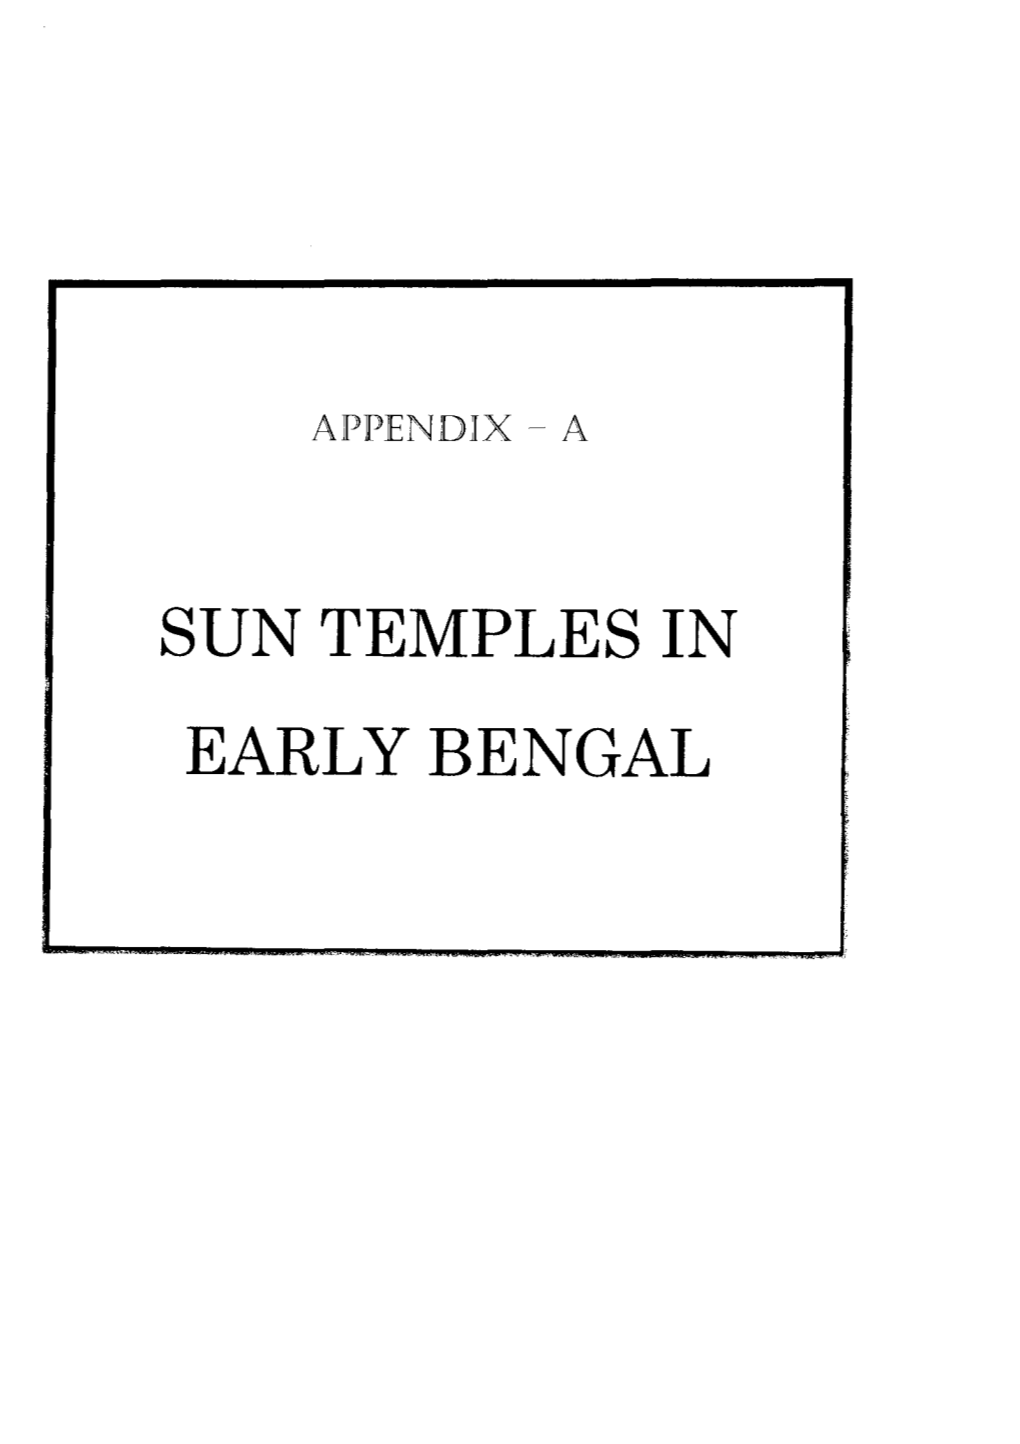 Sun Temples in Early Bengal Appendix- A